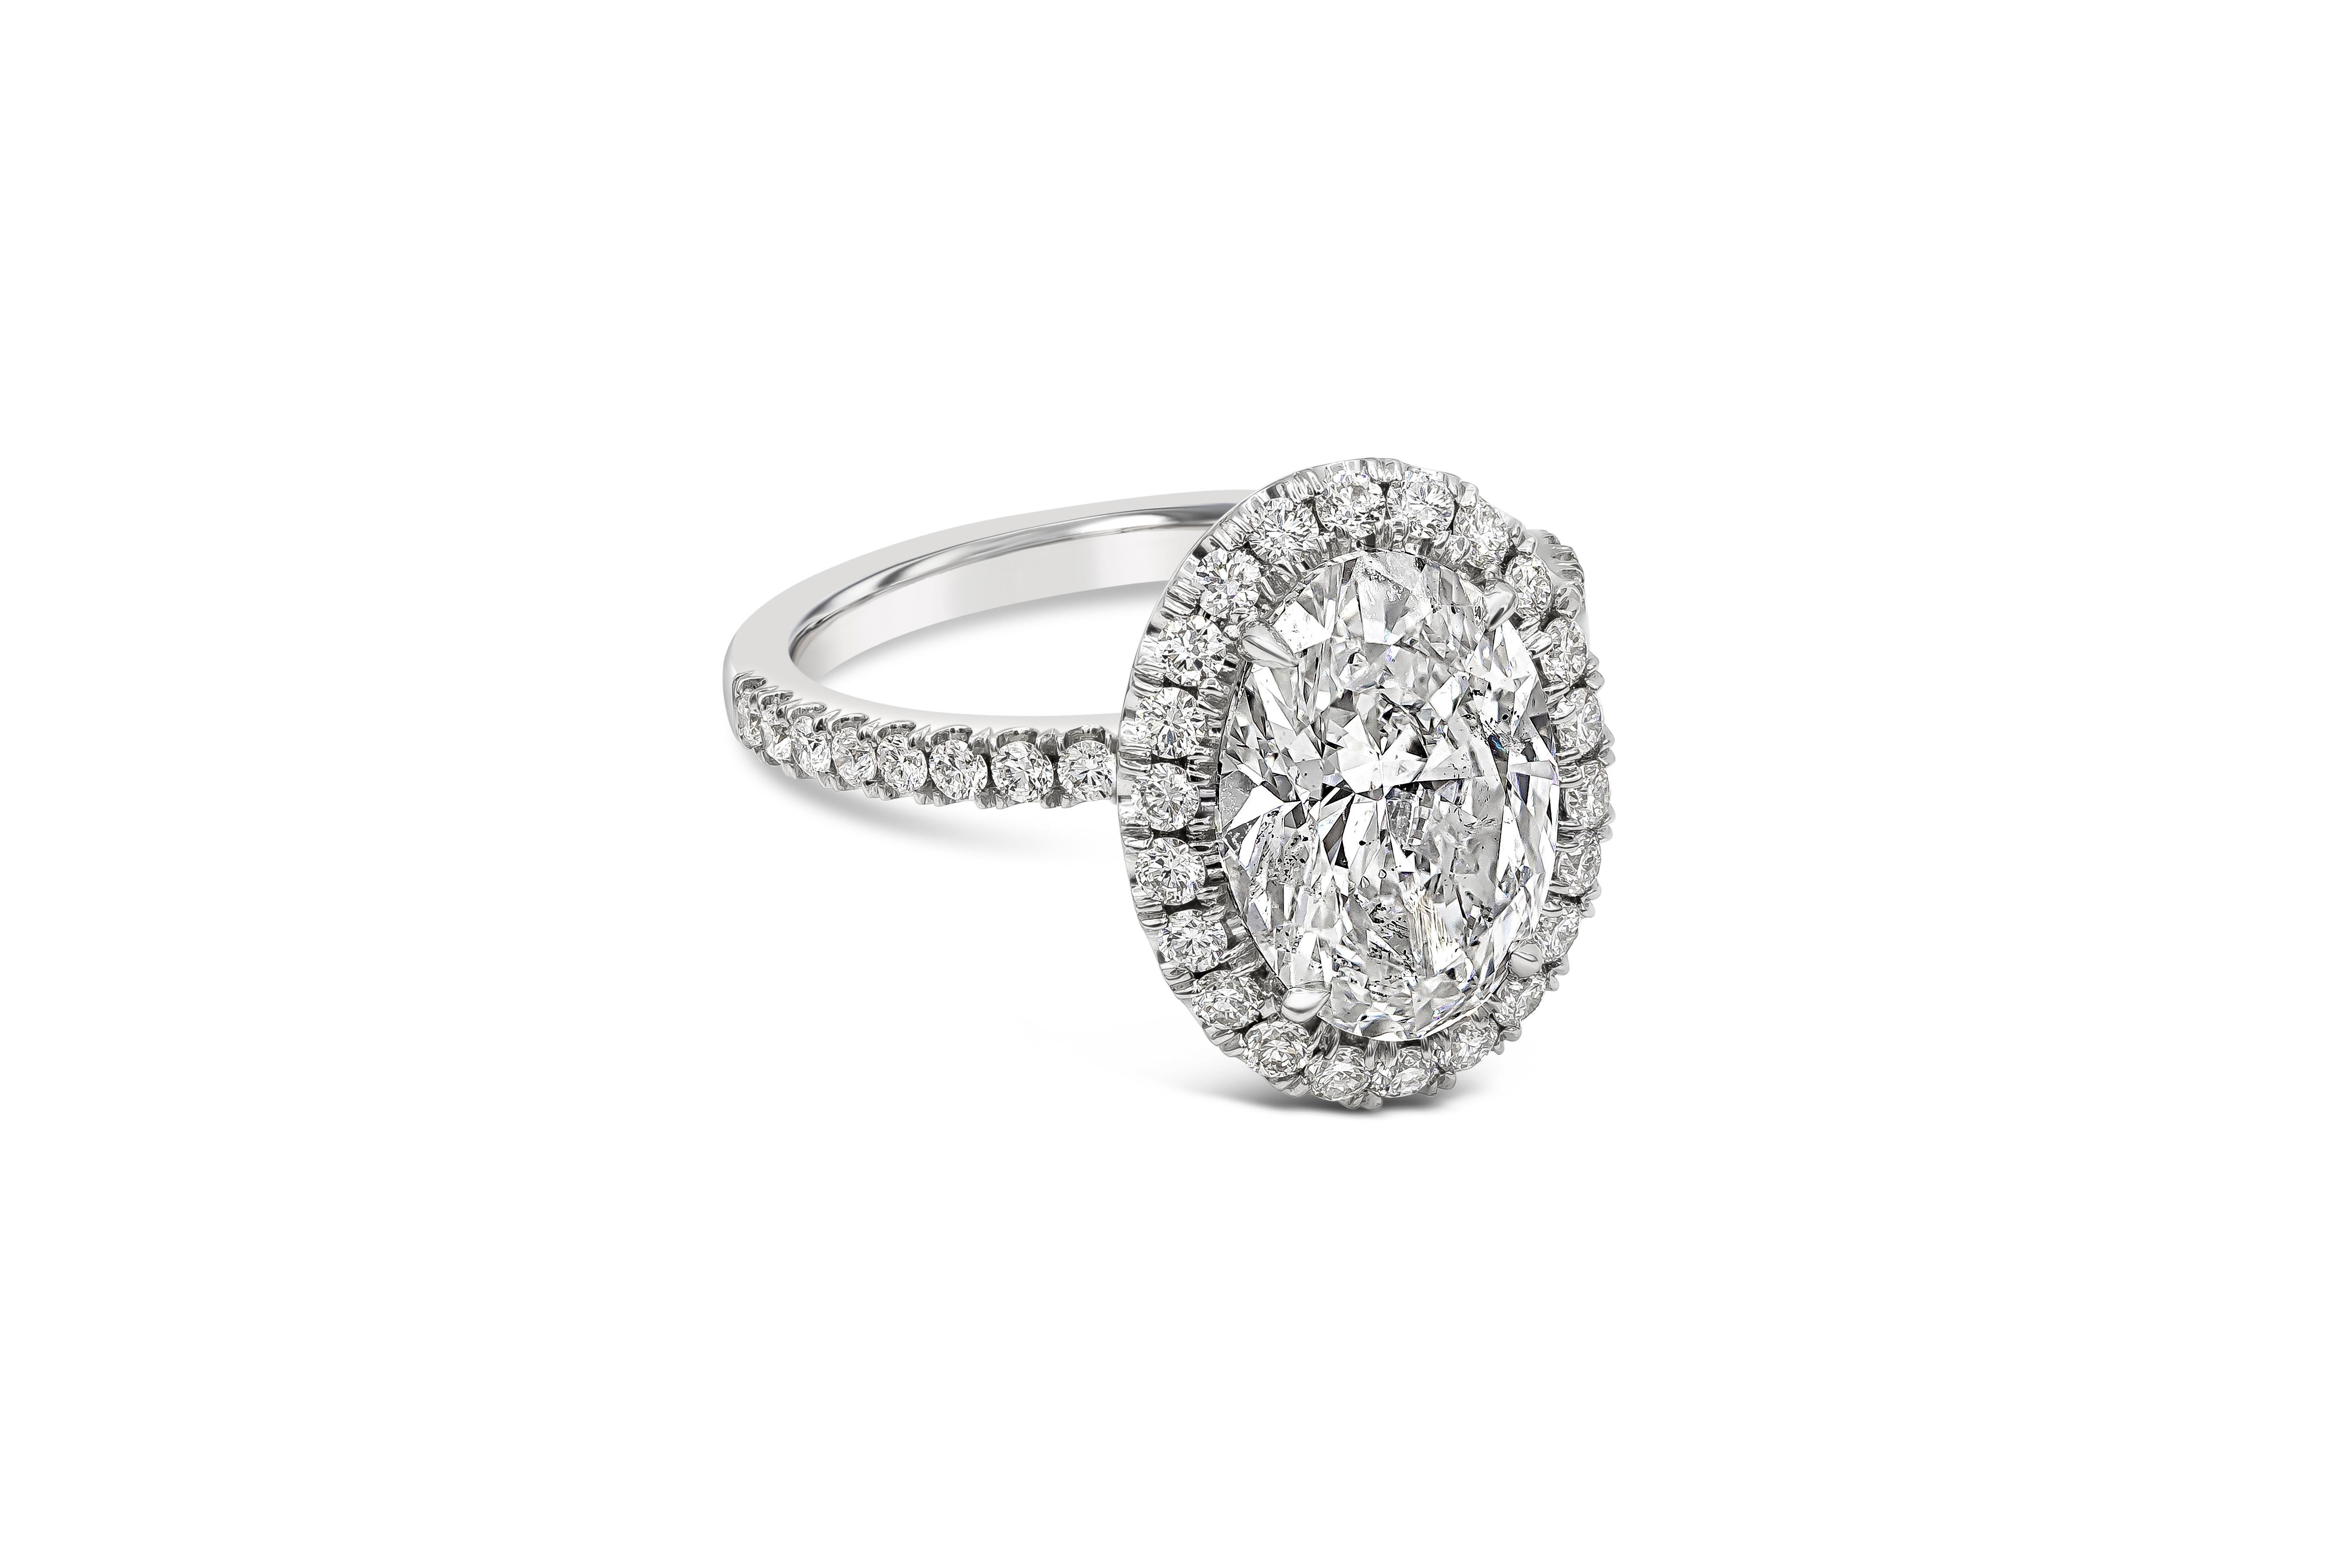 A classic engagement ring style showcasing a 3.01 carats oval cut diamond certified by GIA as G color, SI2 clarity. Surrounded with brilliant round diamonds in seamless halo setting. Shank is diamond encrusted in half eternity setting finely made in